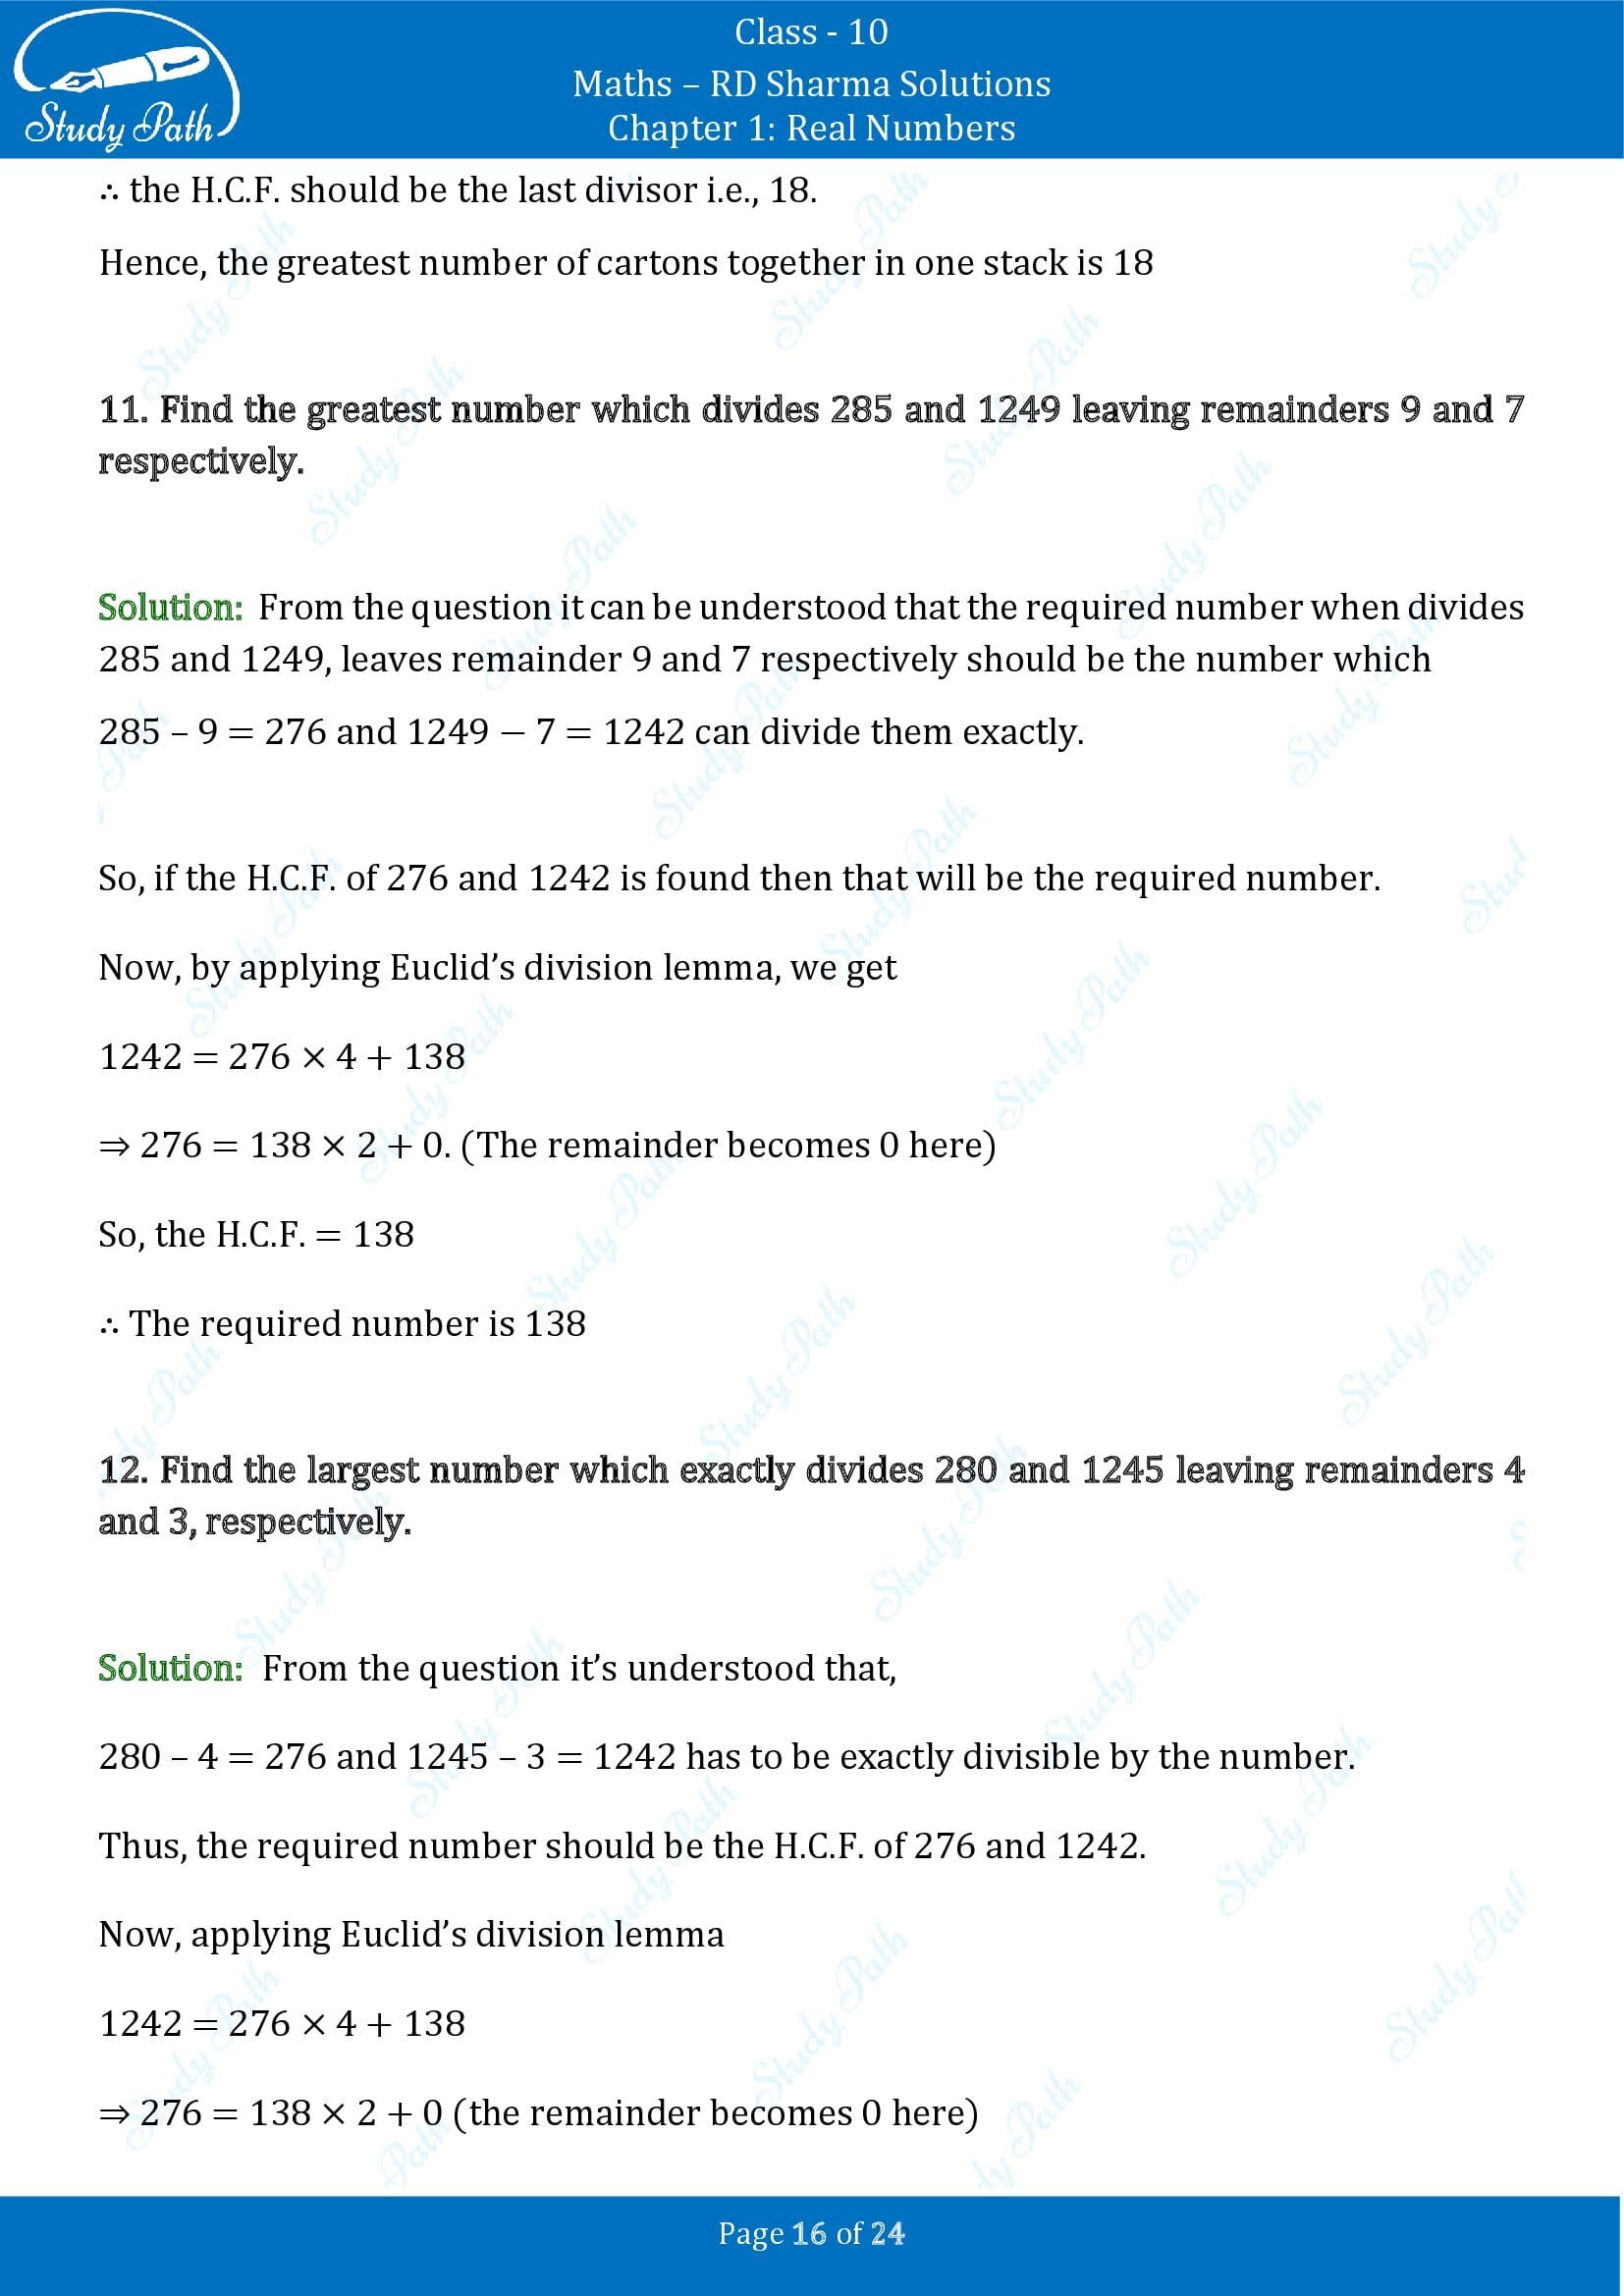 RD Sharma Solutions Class 10 Chapter 1 Real Numbers Exercise 1.2 00016